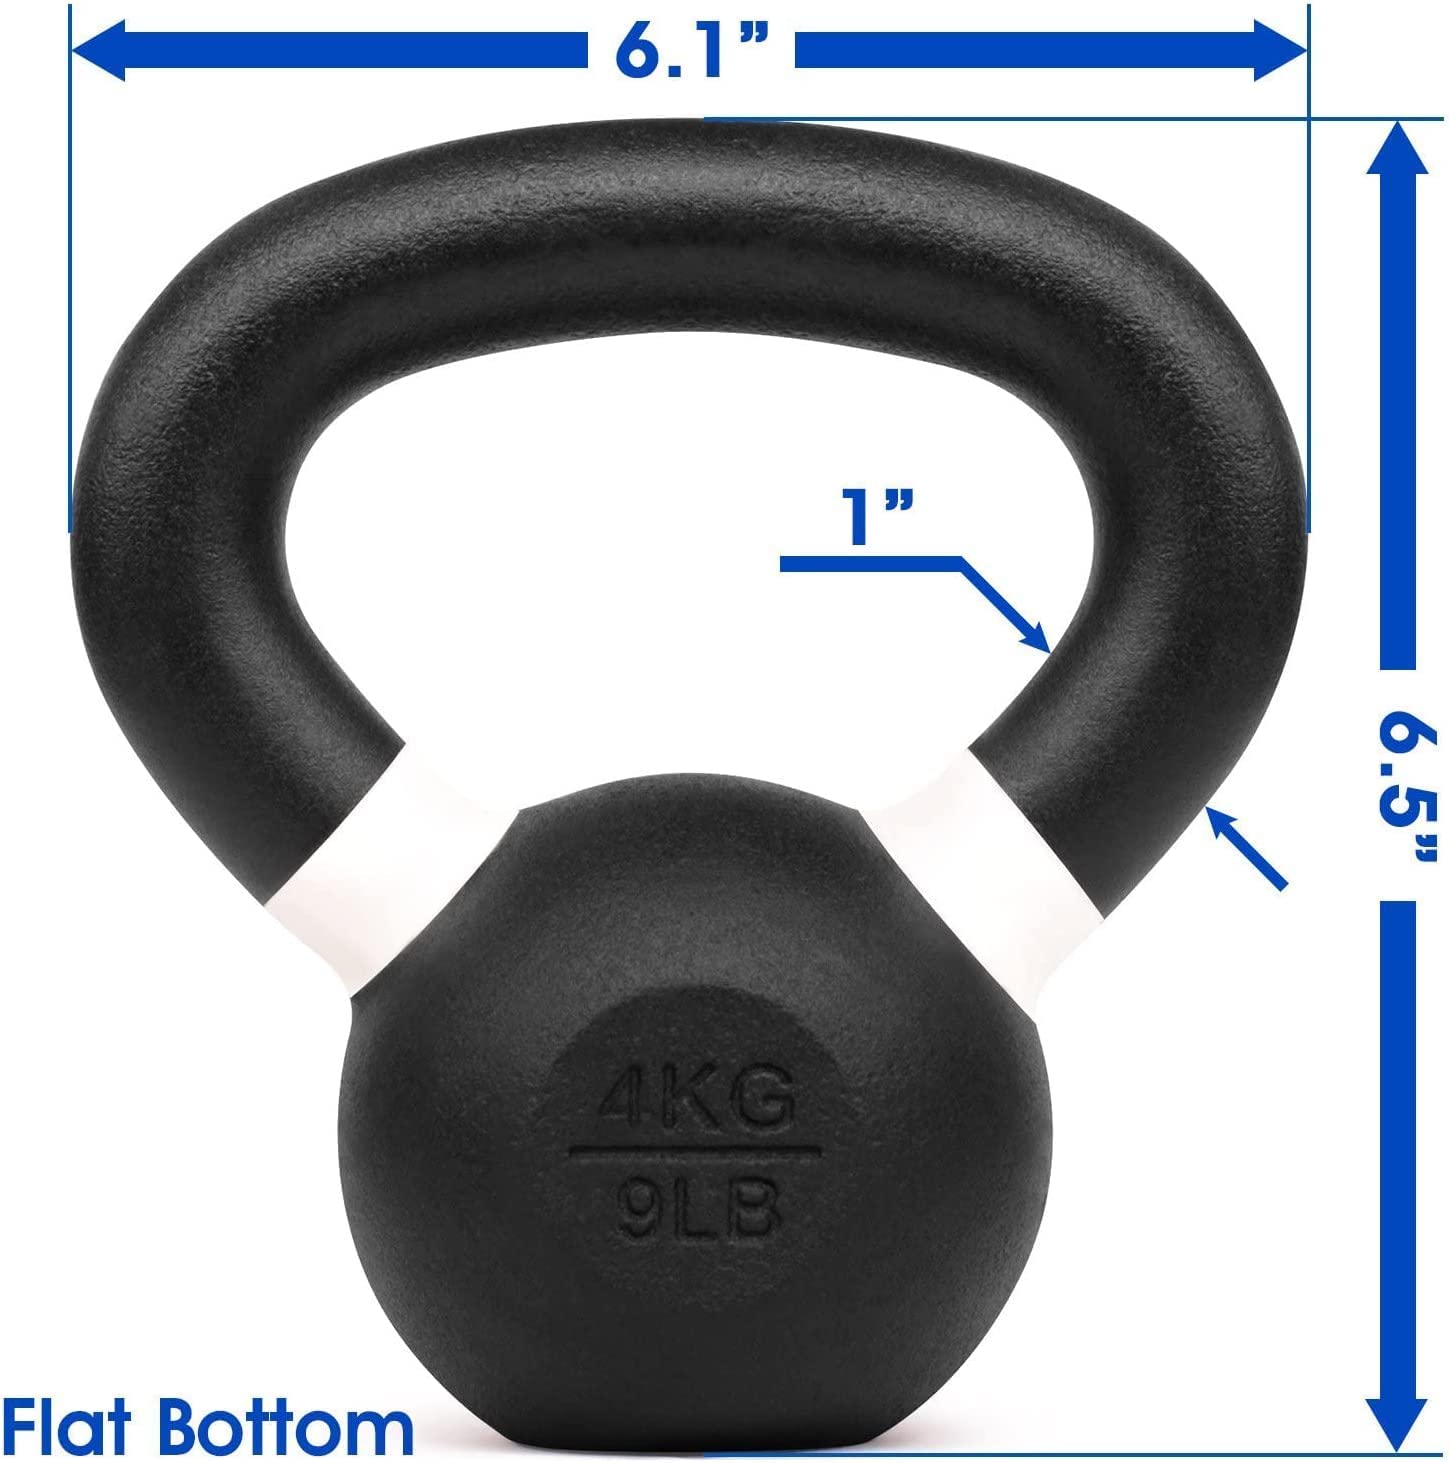 Yes4All 4kg / 9lb Powder Coated Kettlebell, Single - image 5 of 9